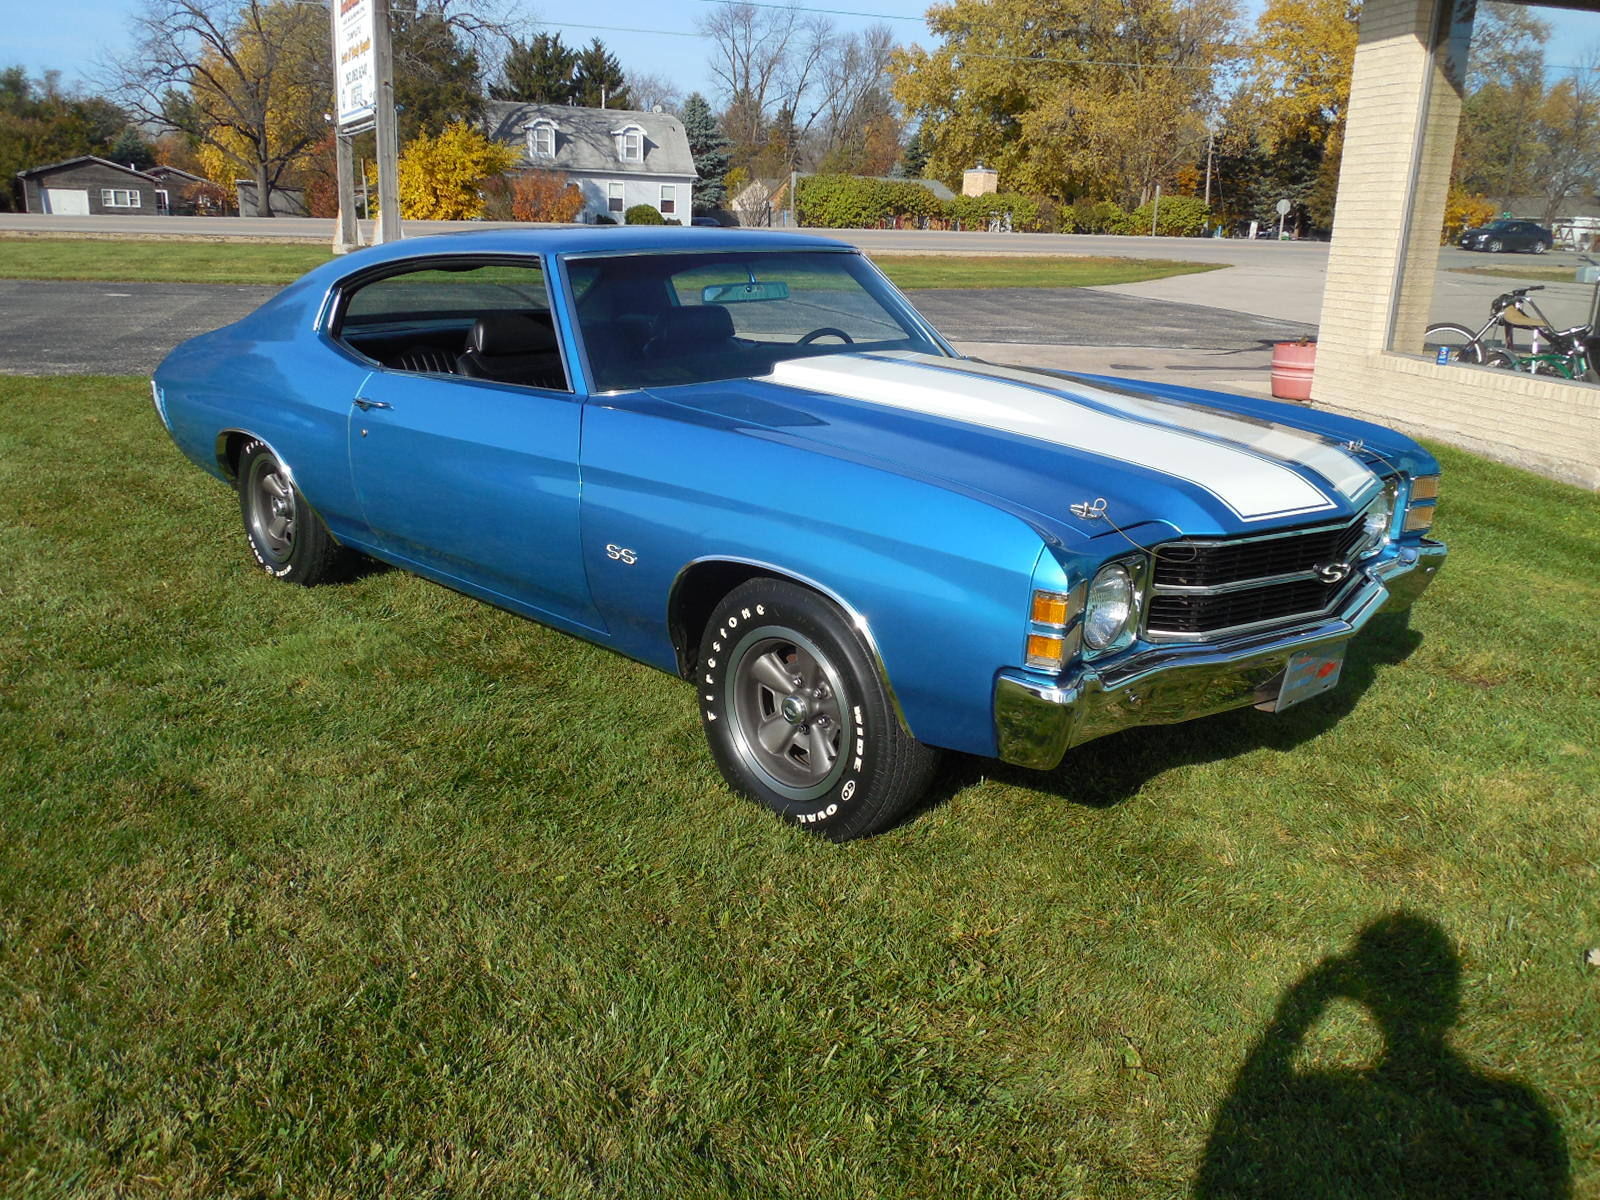 Chevy Chevelle Malibu Ss Blue Cobalt Classic American Muscle Cars